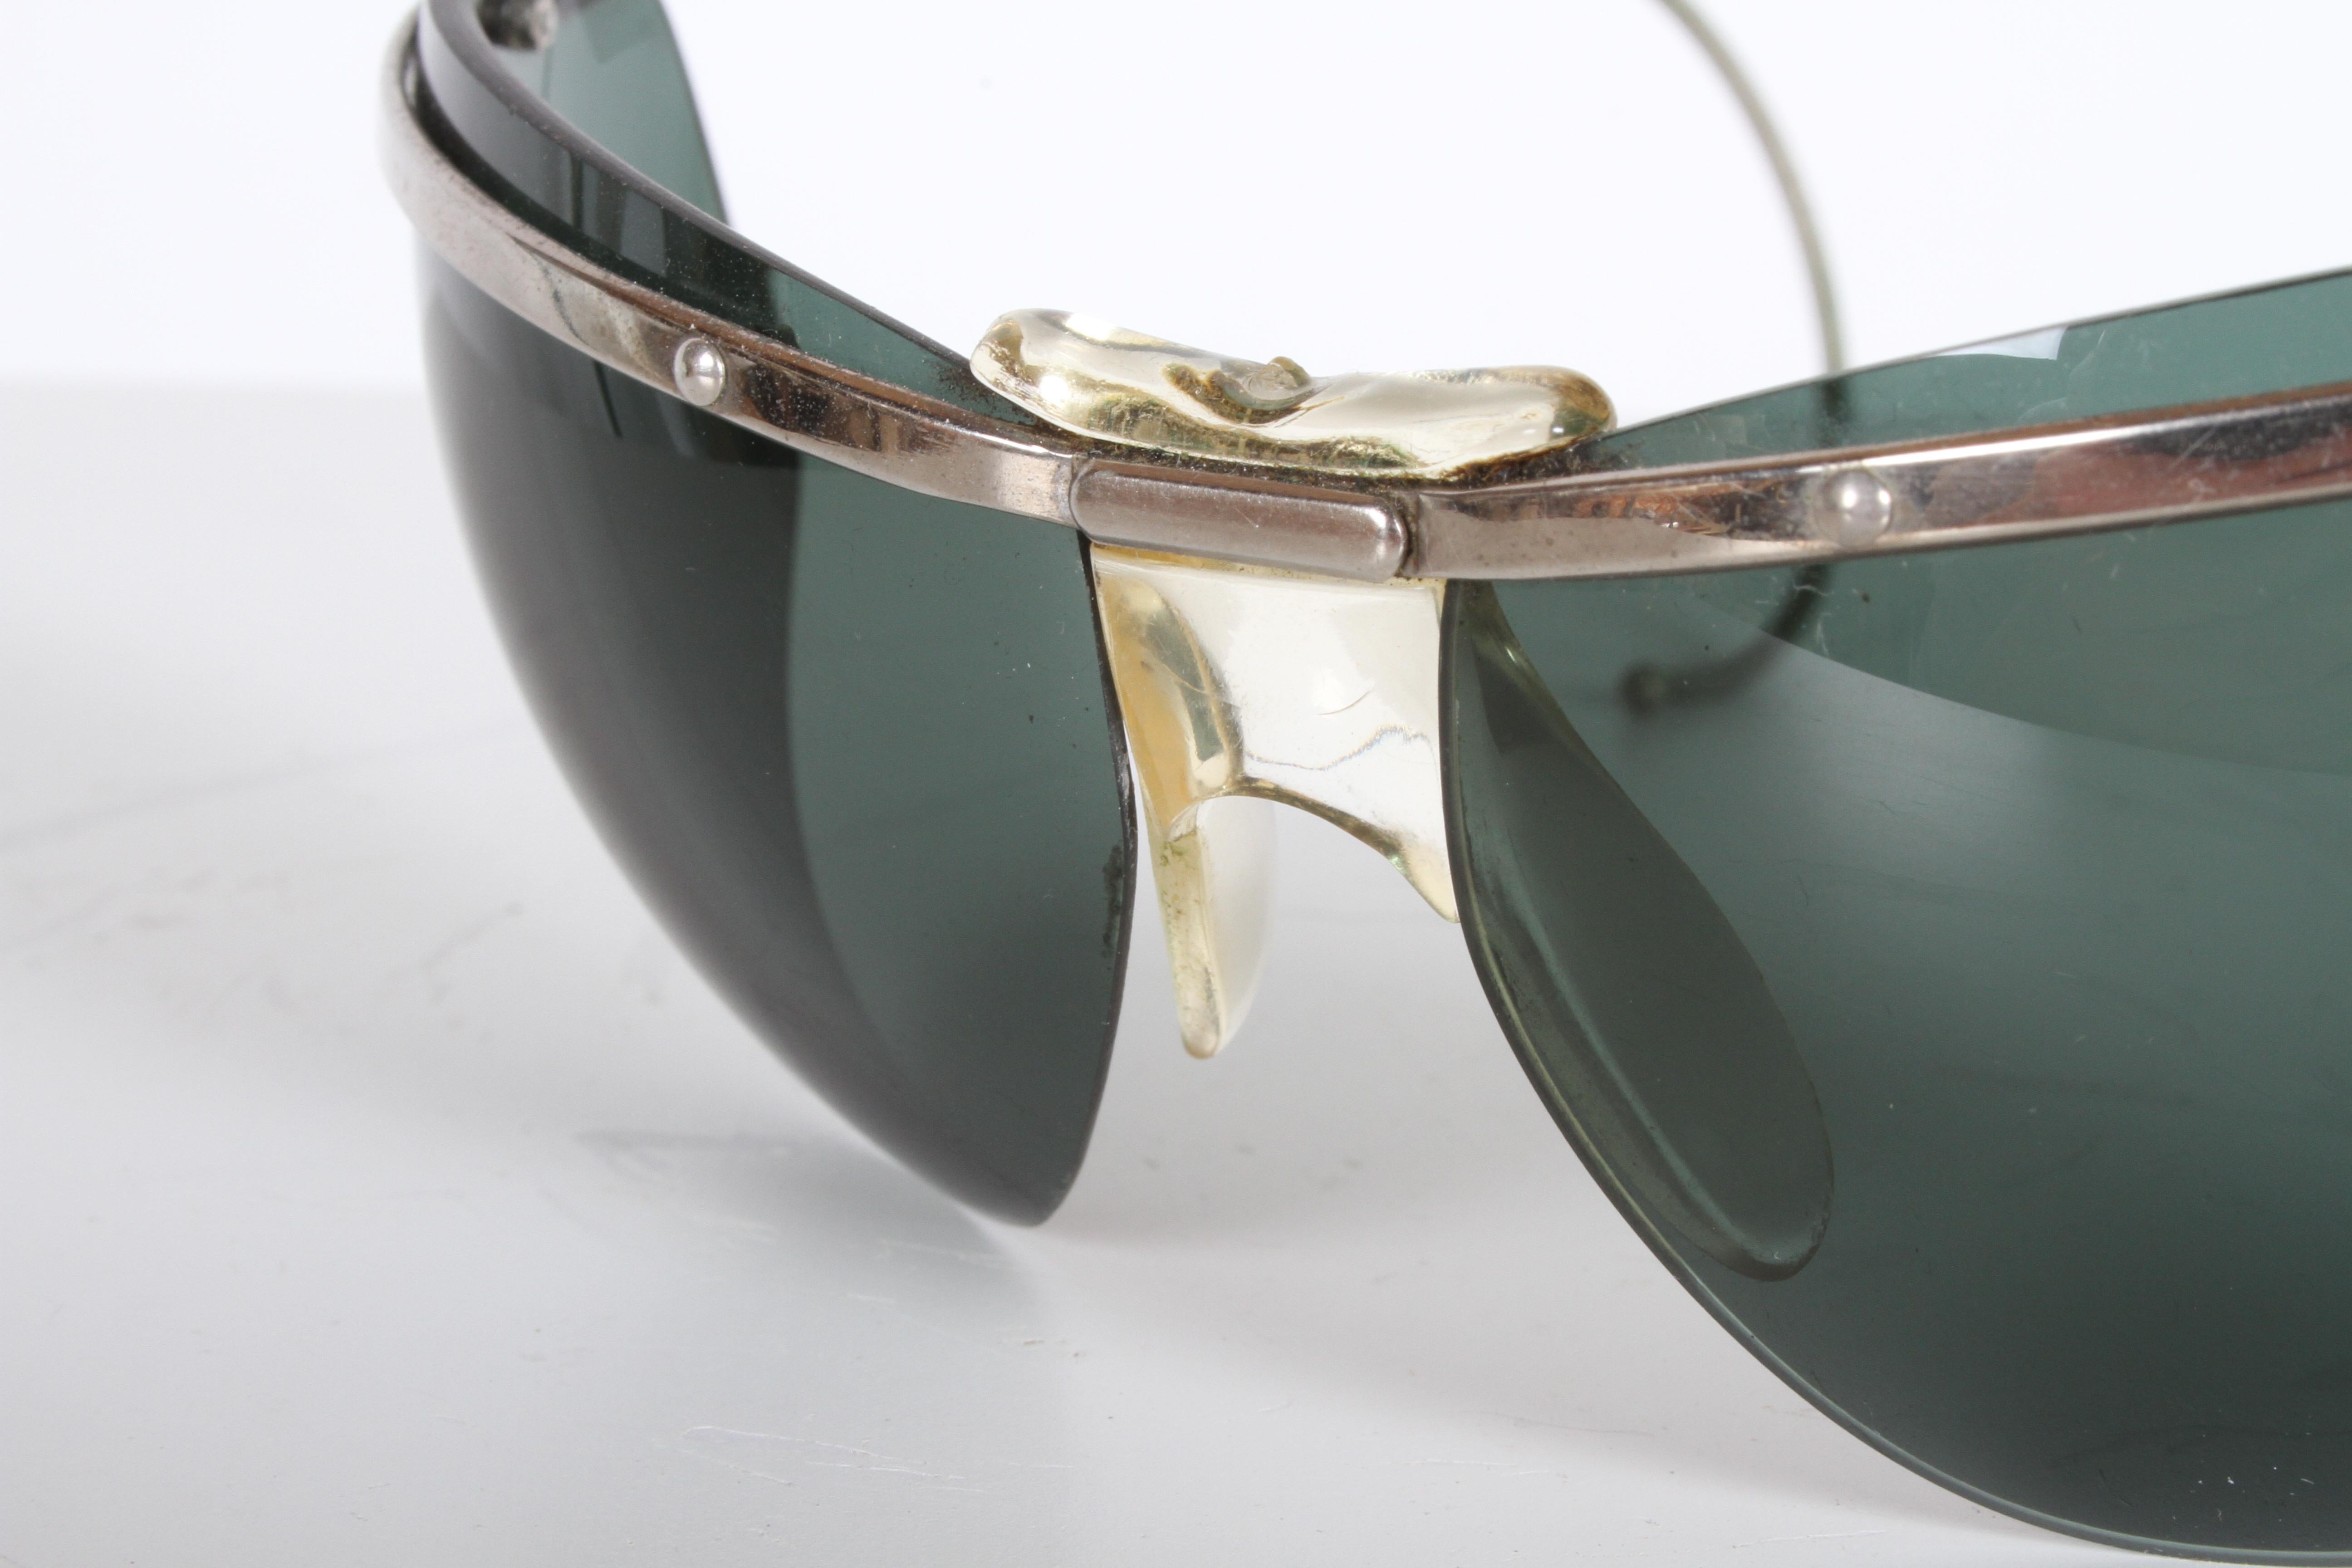 Space Age Rare Sport Wraparound 1960s Vintage Sunglasses by Sol-Amor France, Green Lenses